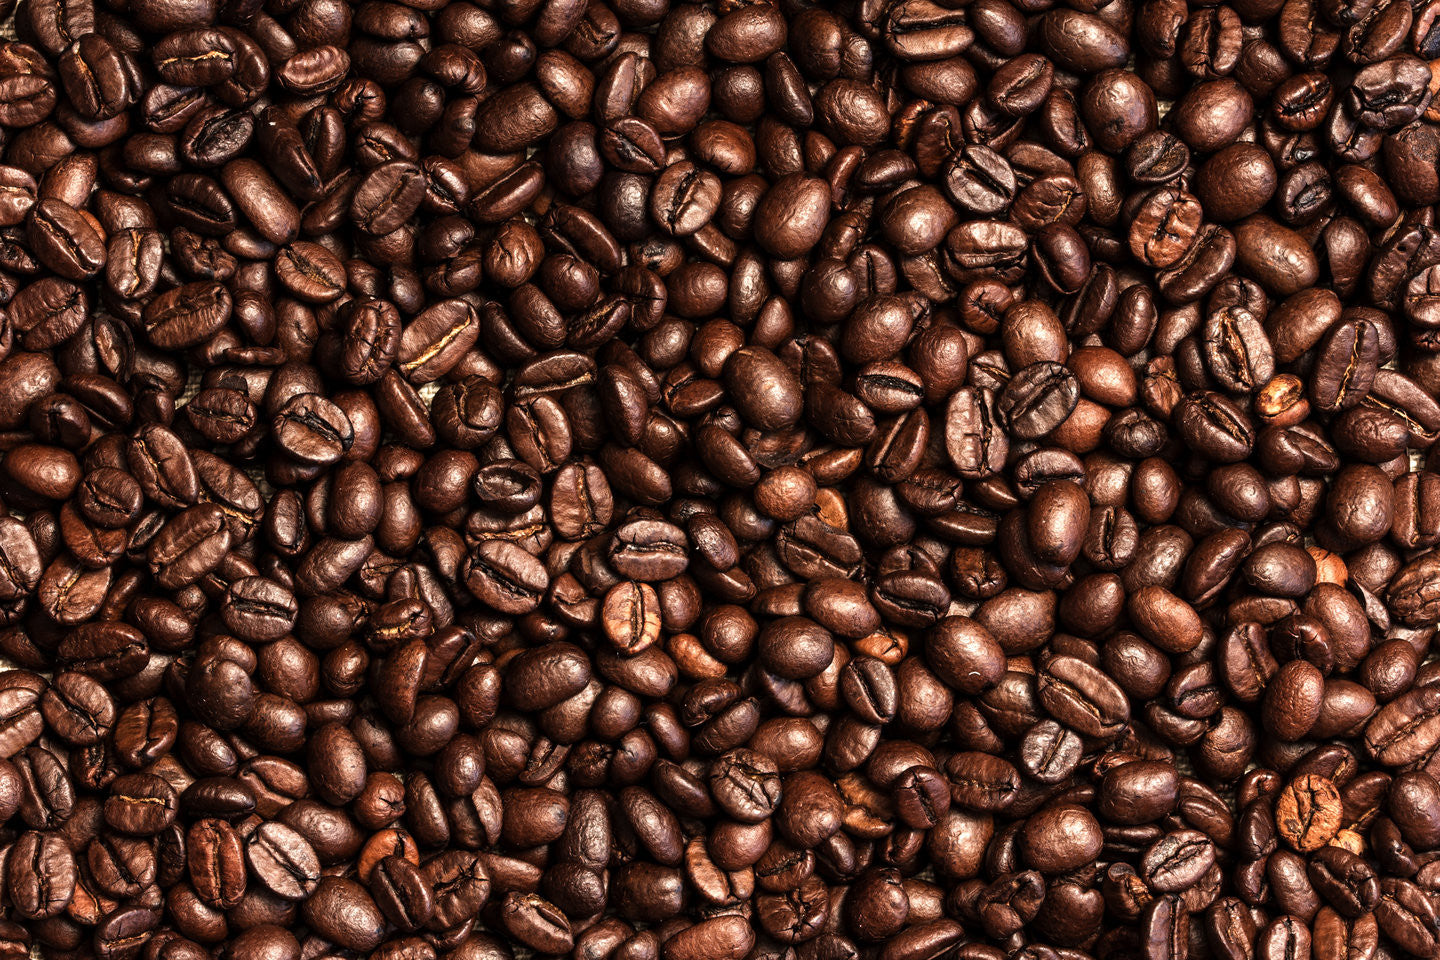 10 great coffee facts that we absolutely love!